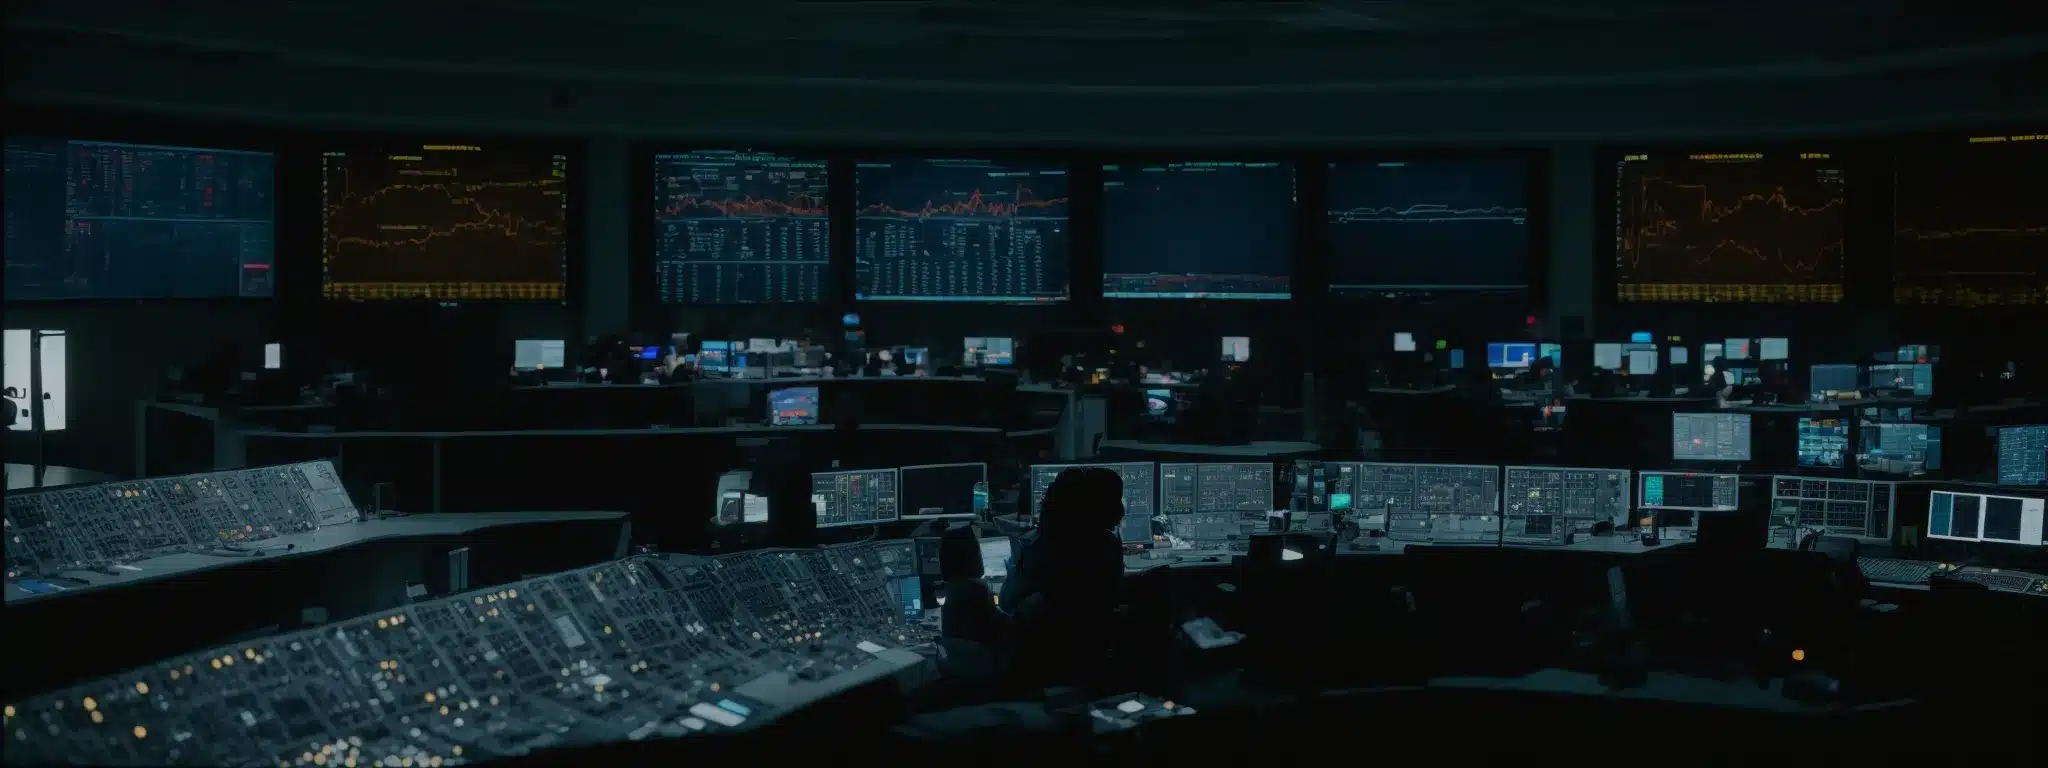 A Technician Adjusts Dials On A Large Console In A Mission Control Room Filled With Monitors And Data Screens.